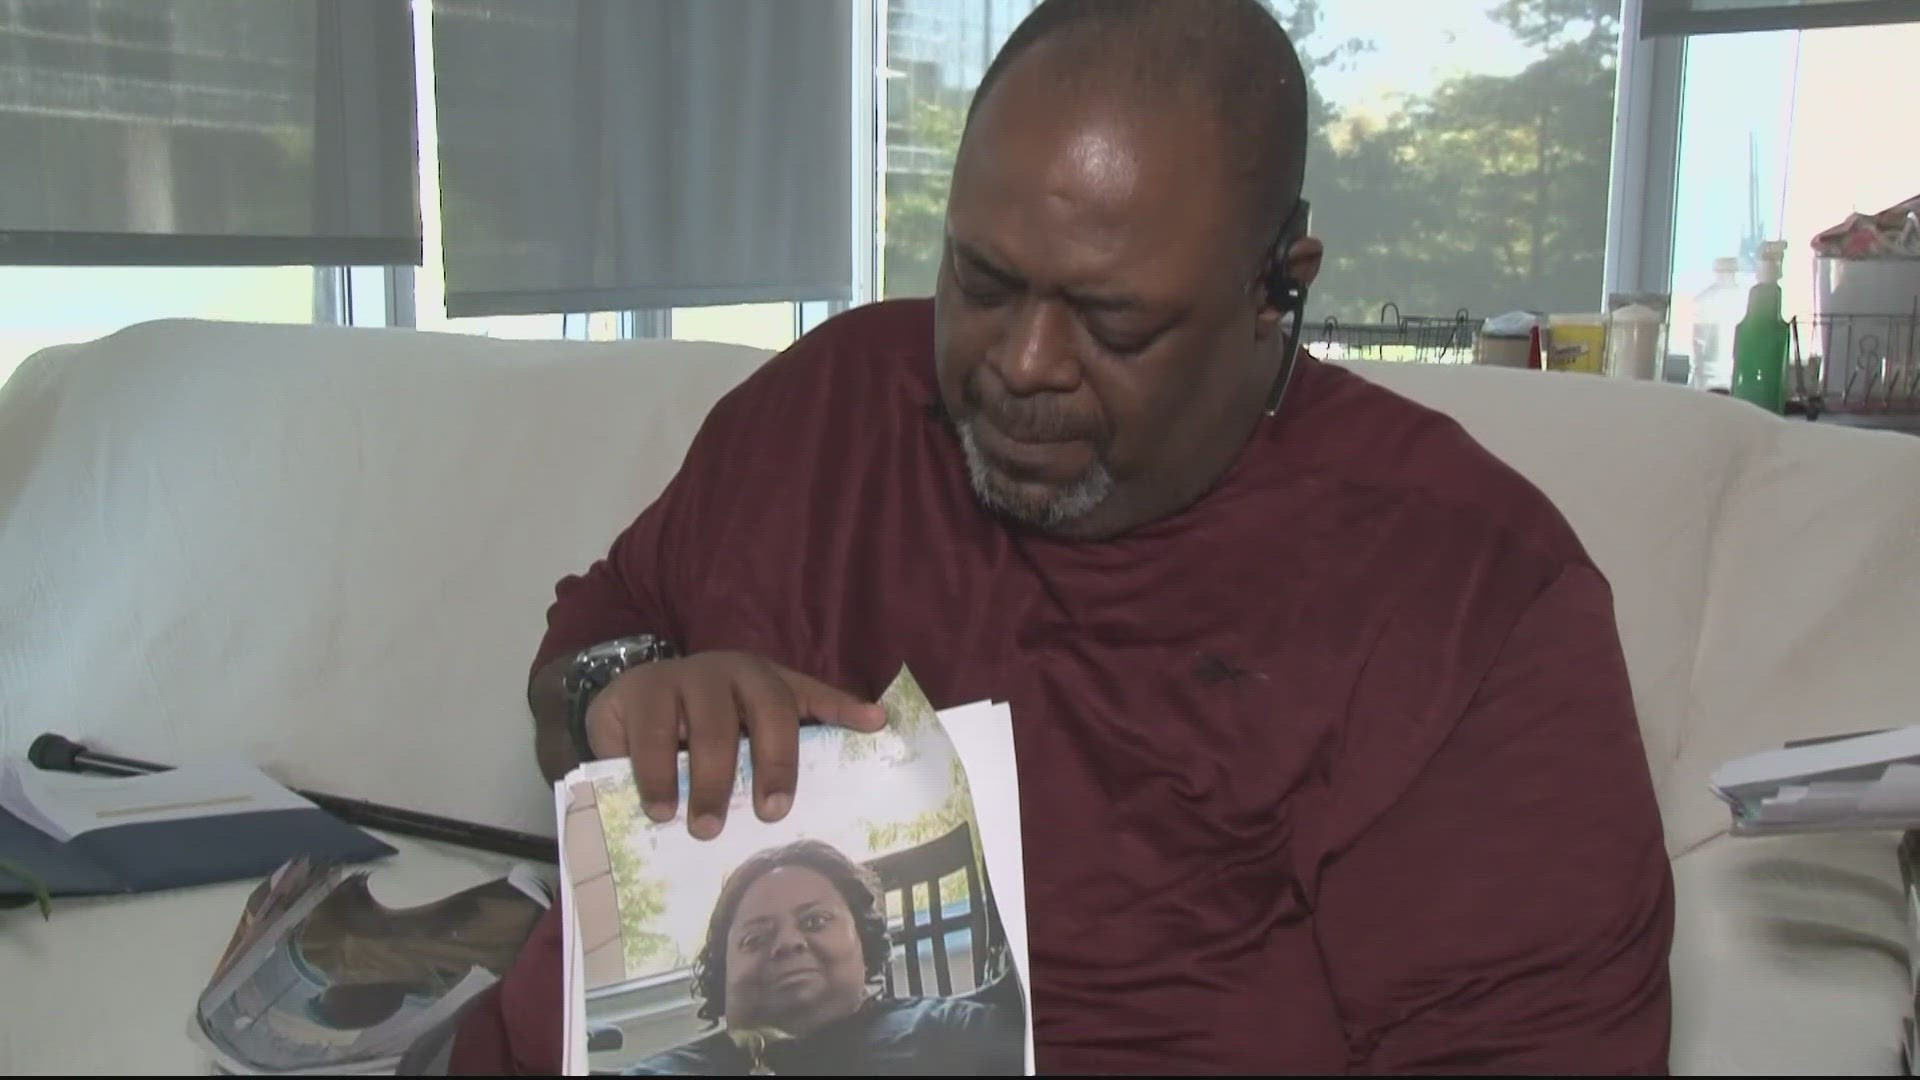 A disabled man caring for his dying mom lost his housing voucher when she passed.